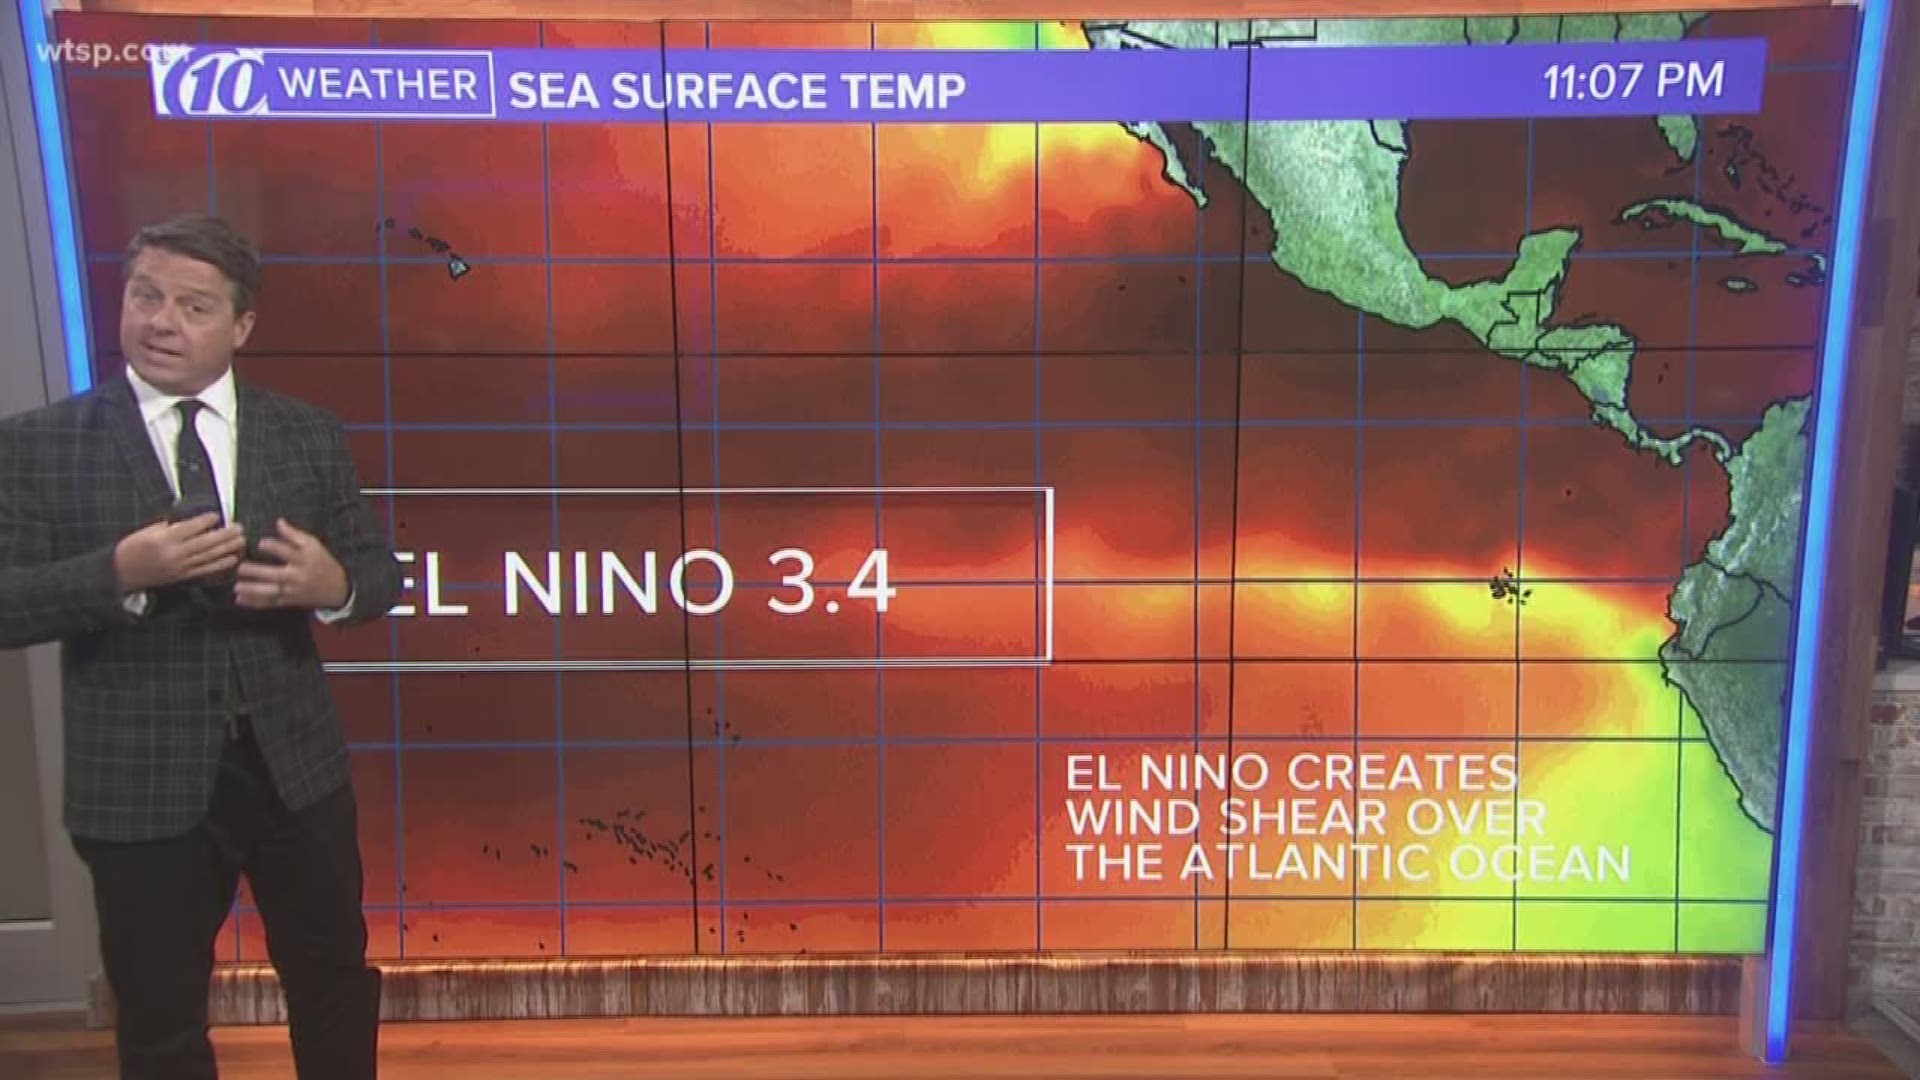 The National Hurricane Center has increased its predictions for the 2019 hurricane season because of a weakening El Nino.